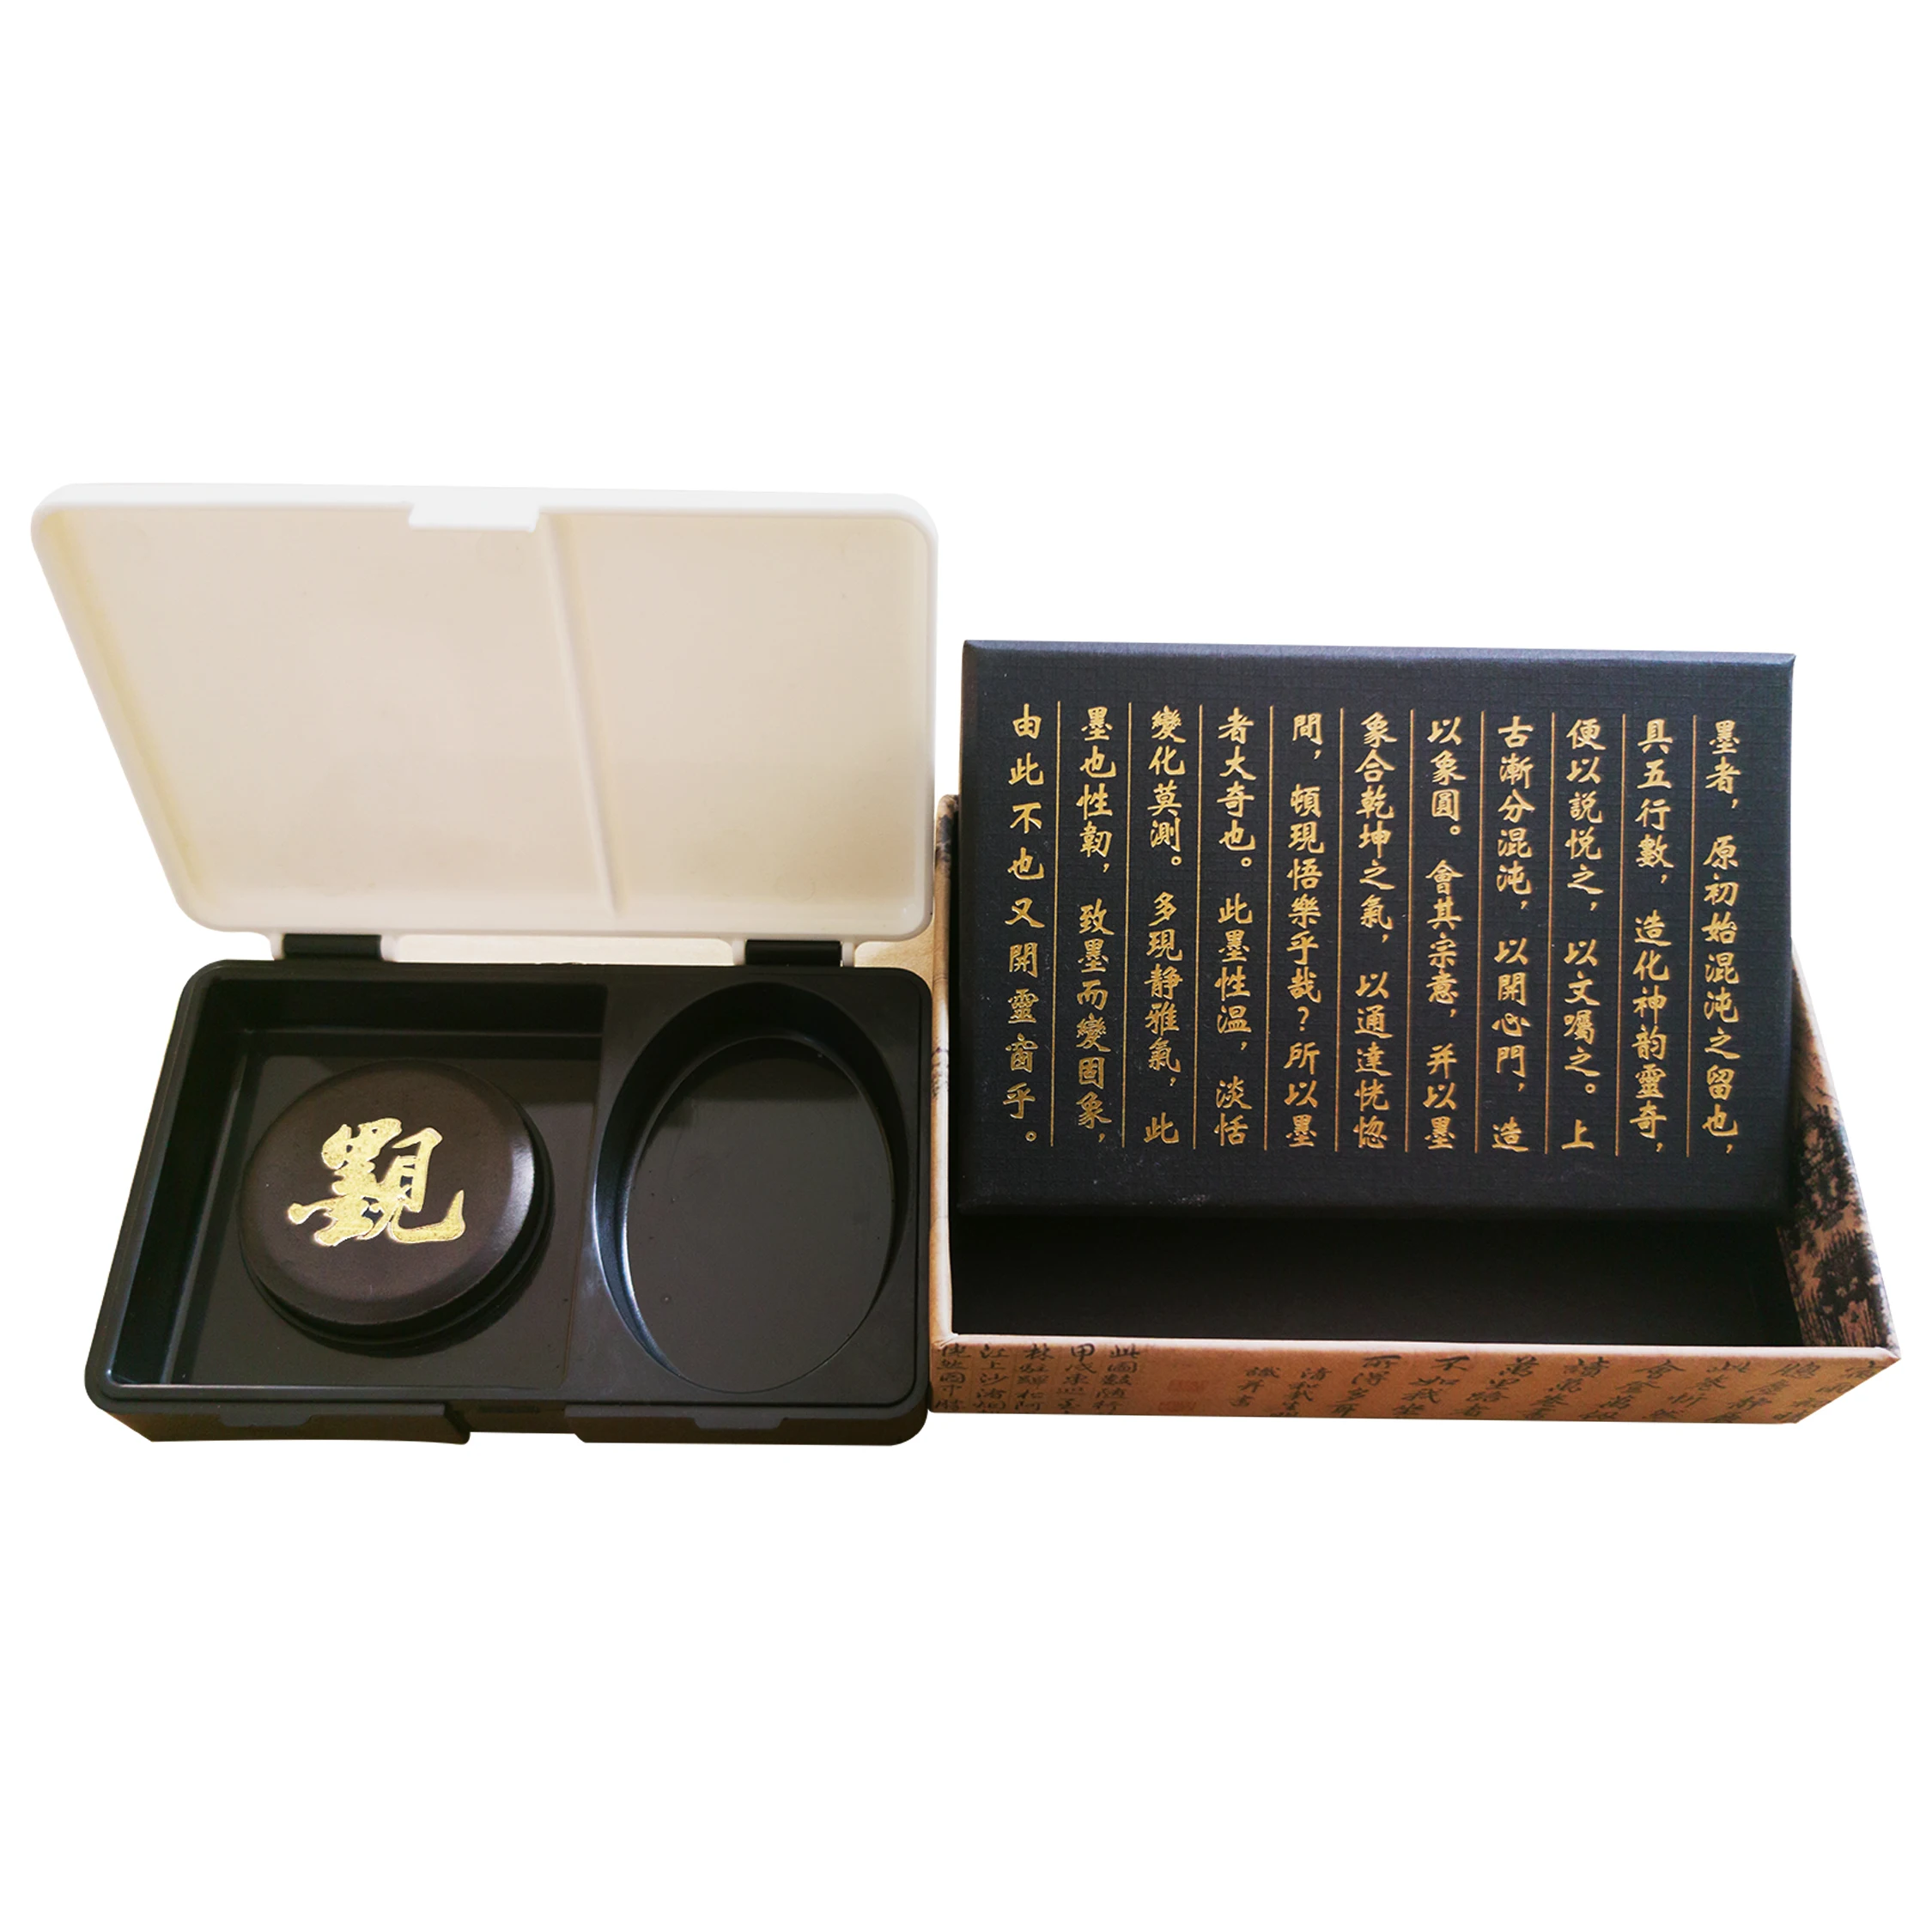 Sunny Professional adult Ink Stone Chinese Calligraphy set Tools with Covers for Artist